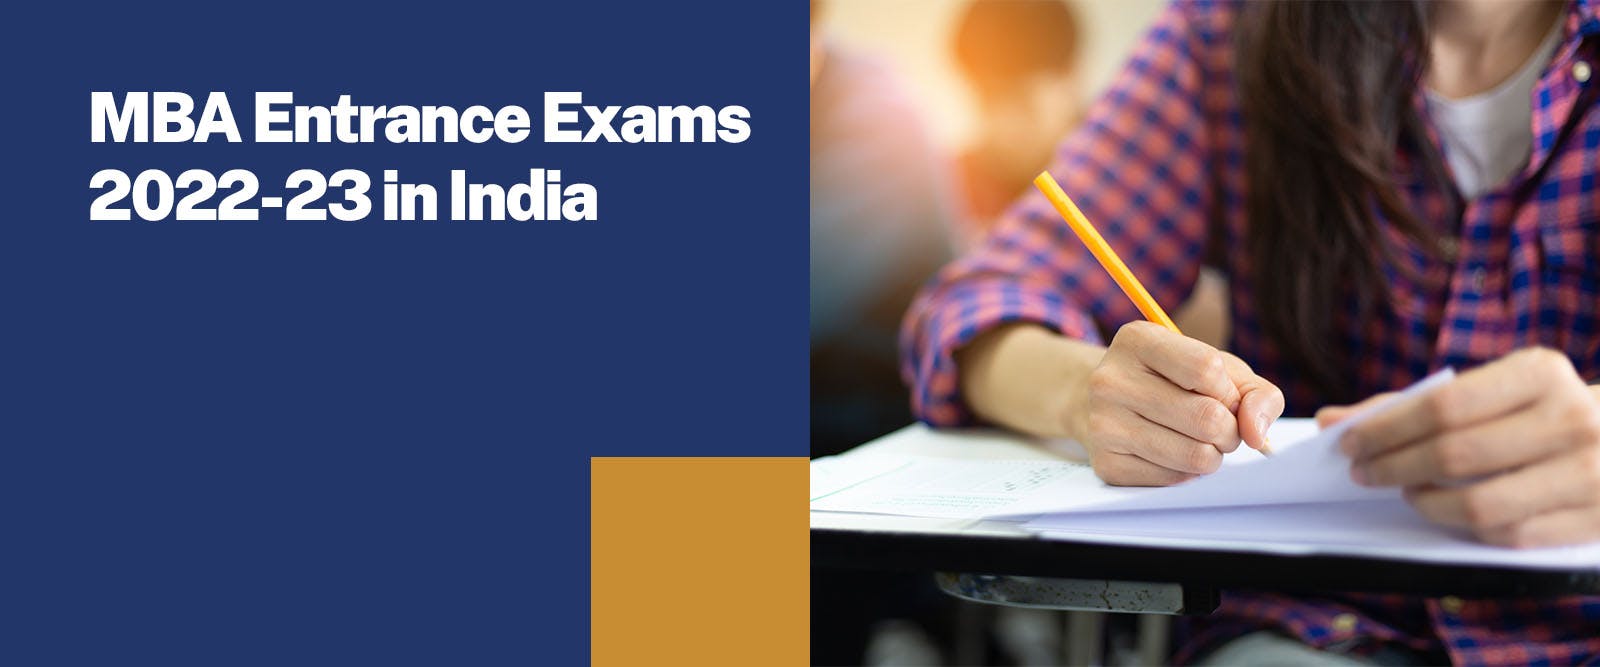 MBA Entrance Exams 2022-23 in India